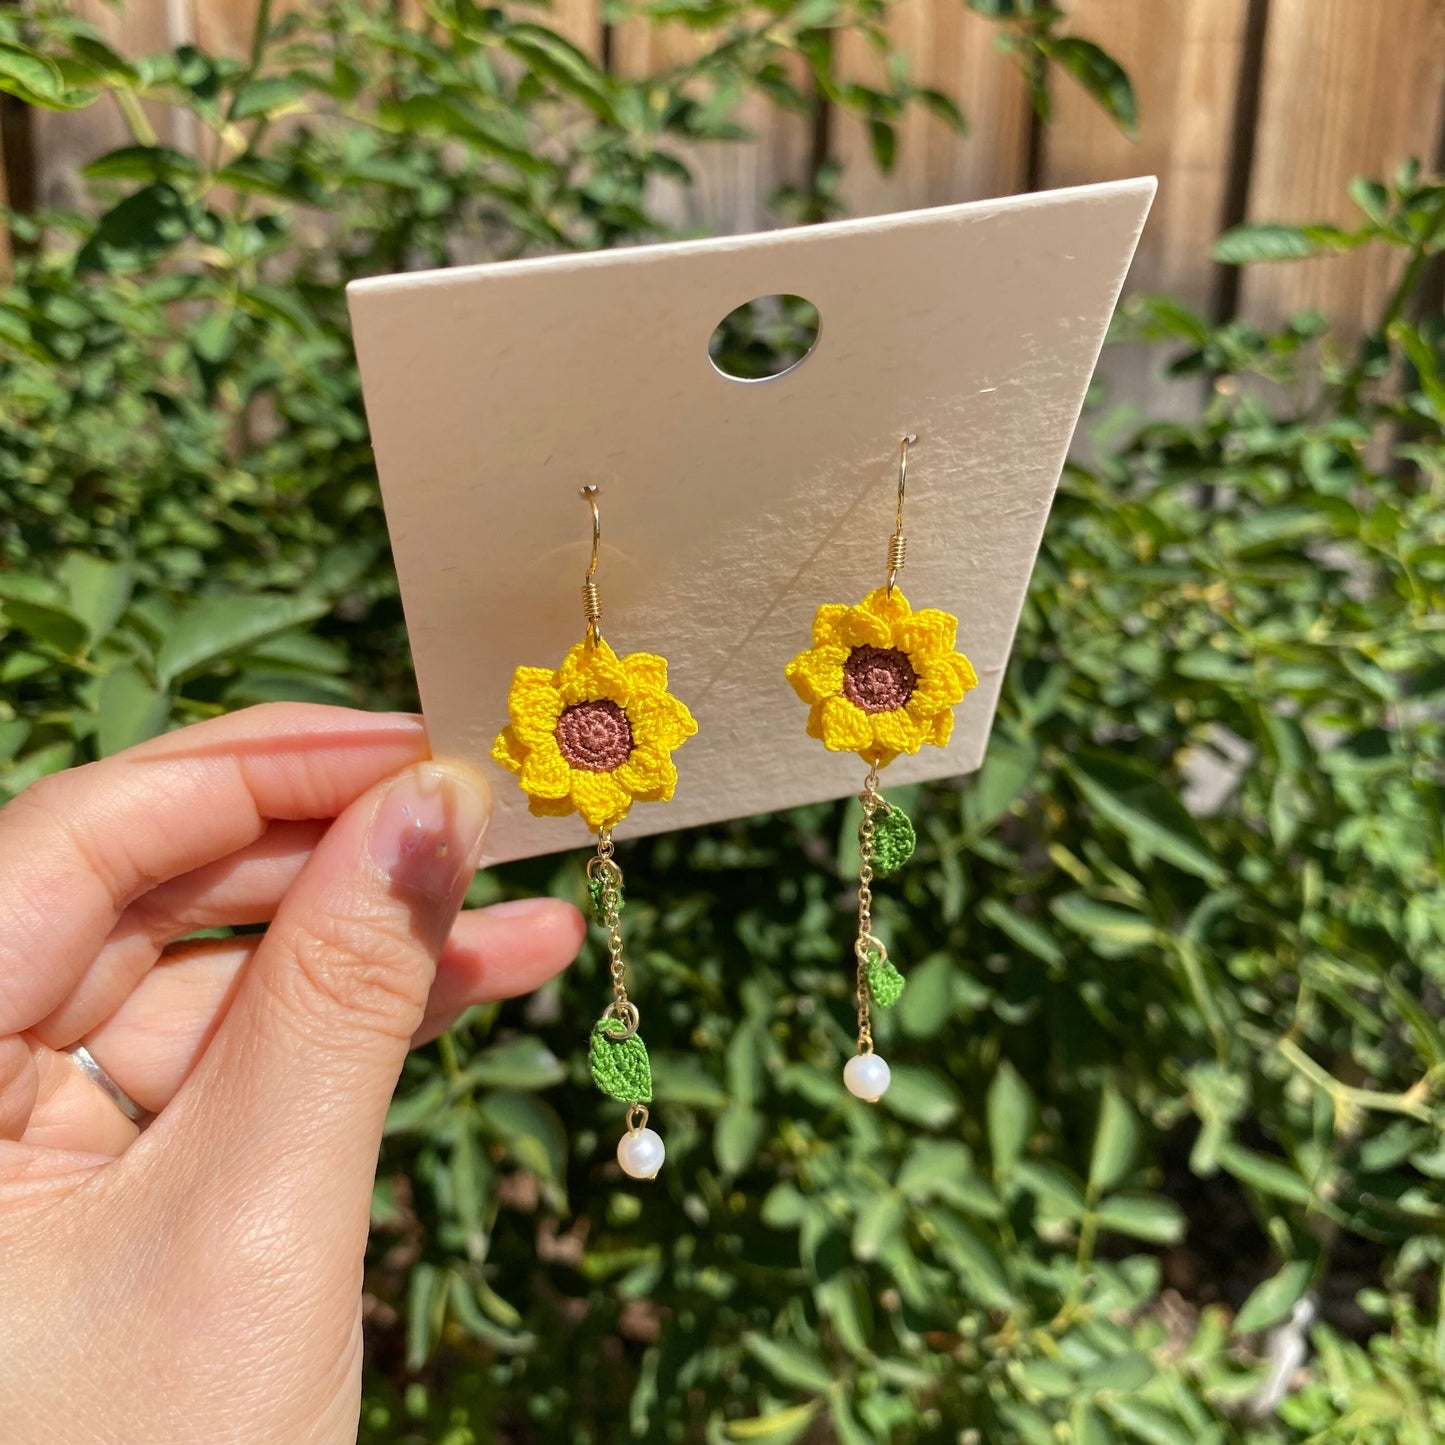 Load image into Gallery viewer, Yellow Sunflower dangle earrings/Microcrochet/14k gold/fall flower gift for her/Knitting handmade jewelry/Ship from US
